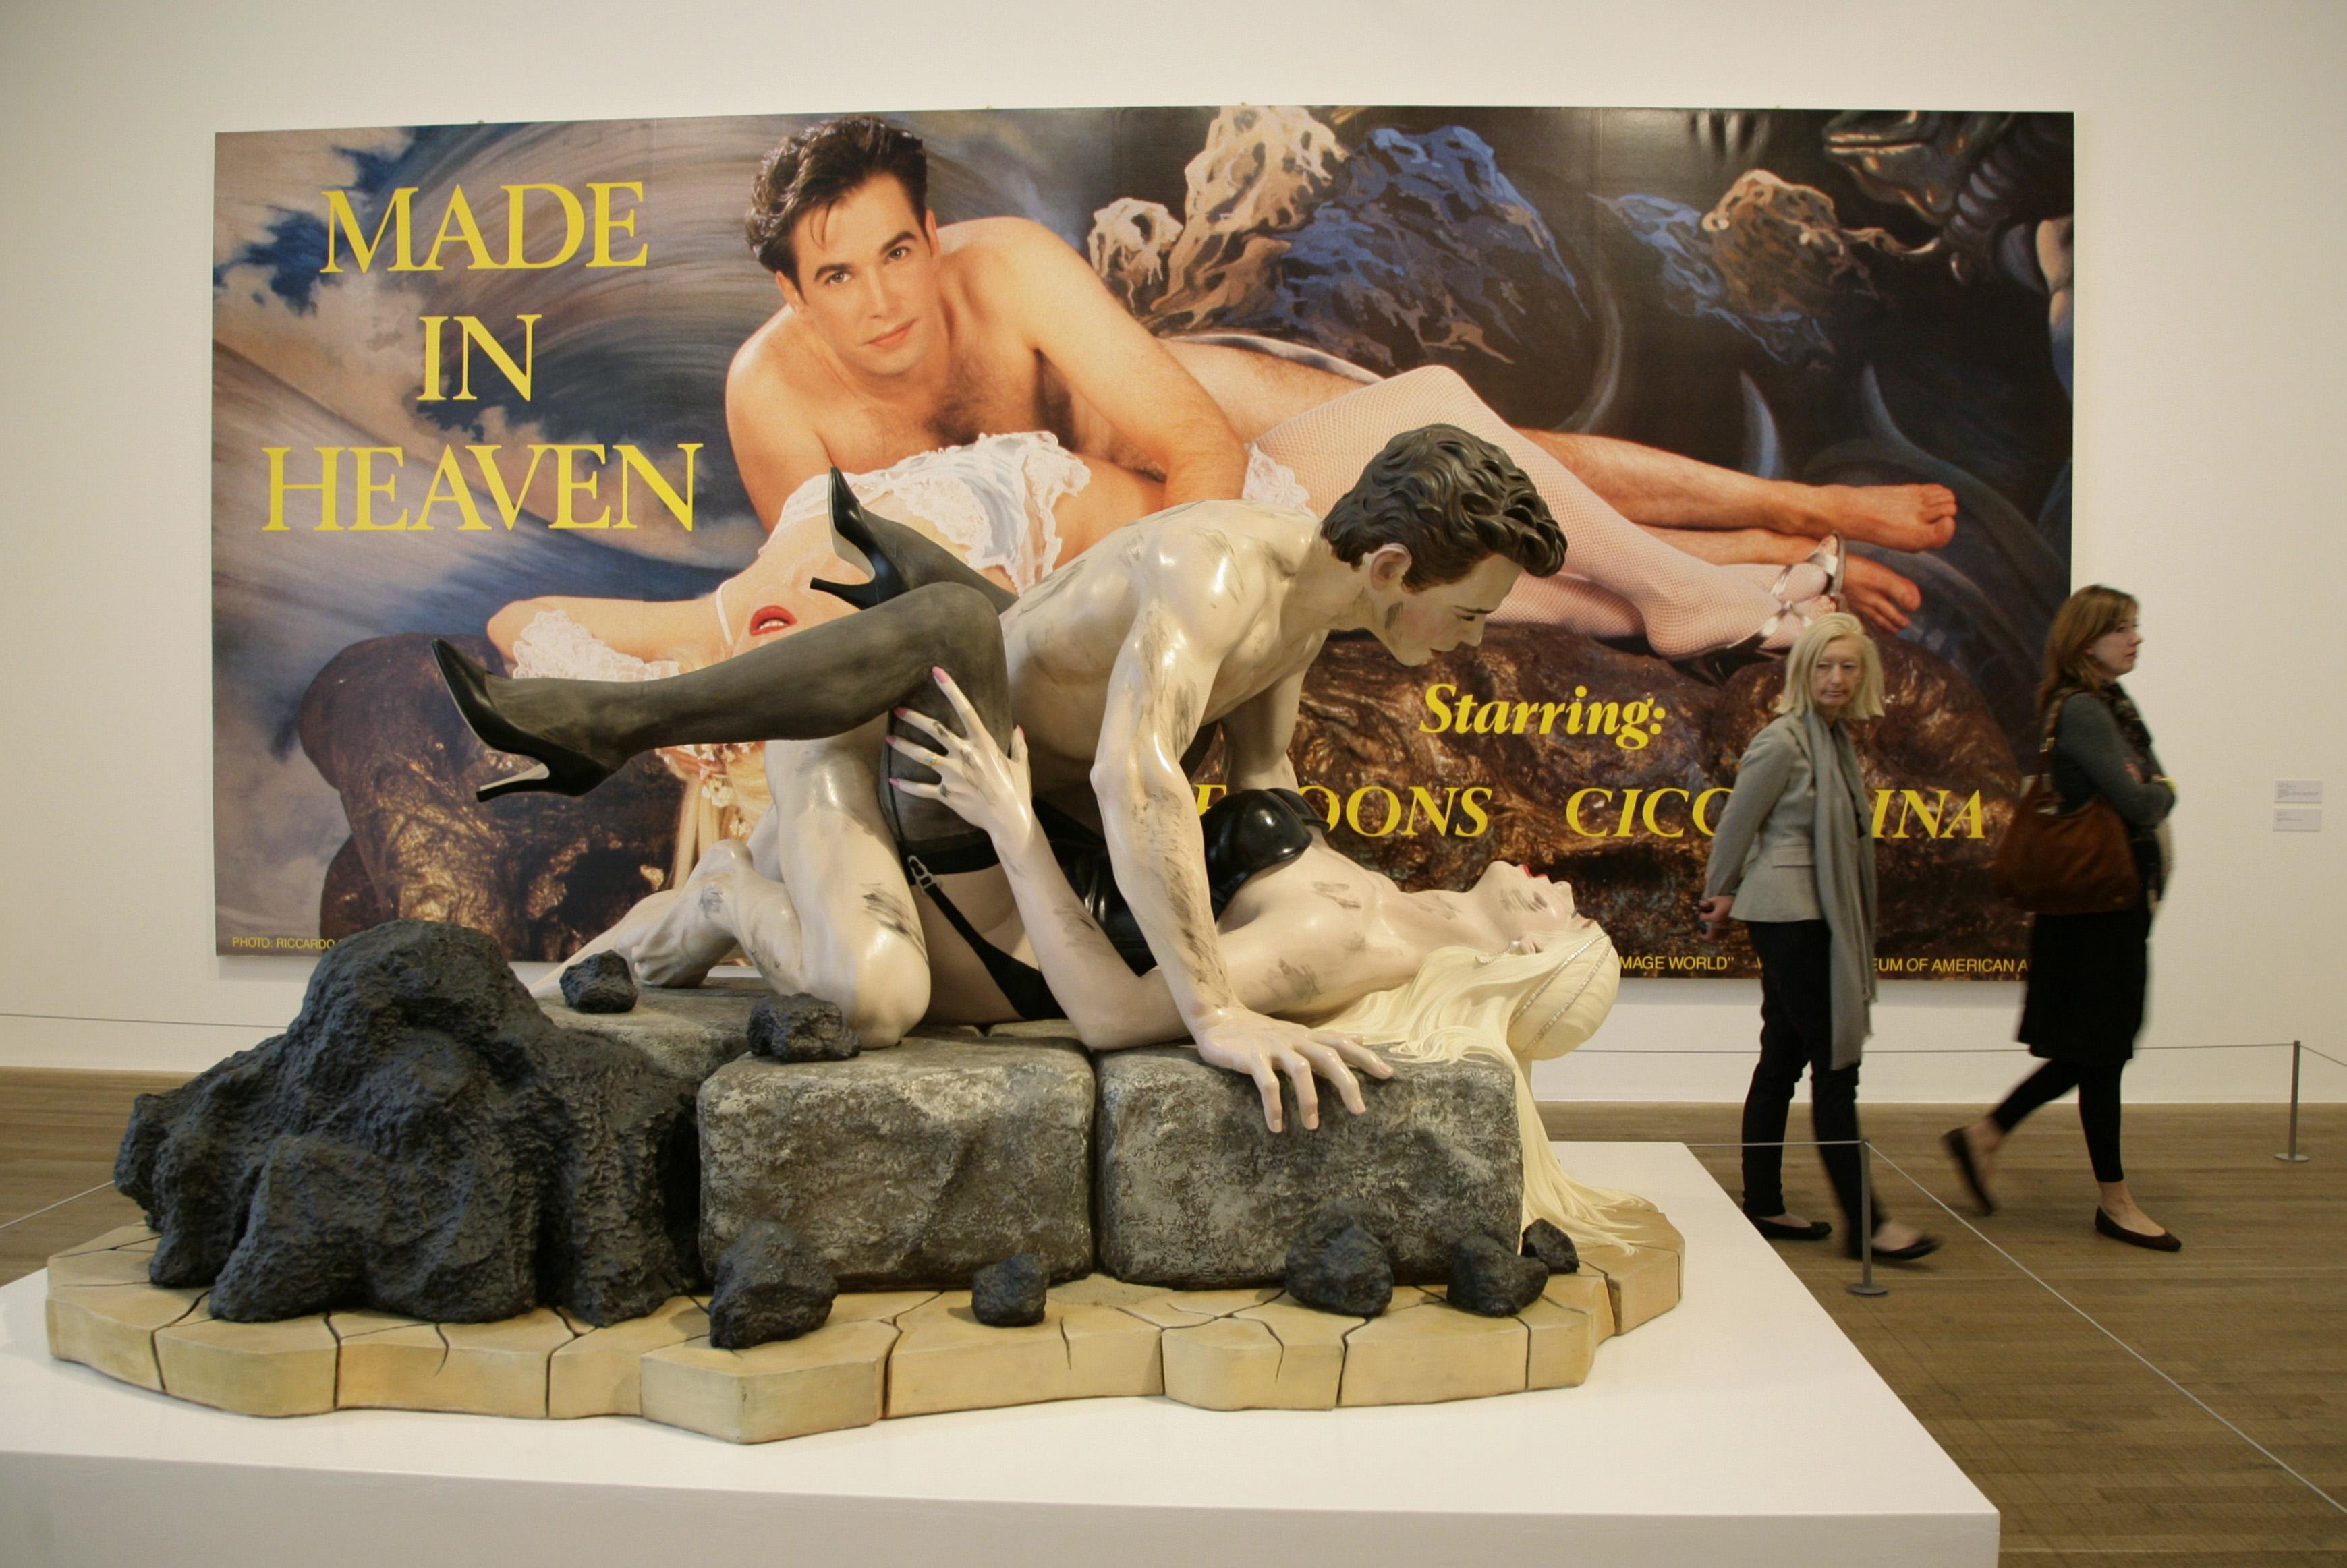 Jeff Koons Porn - Jeff Loves Cicciolina: Looking Back at 'Made in Heaven' - GARAGE